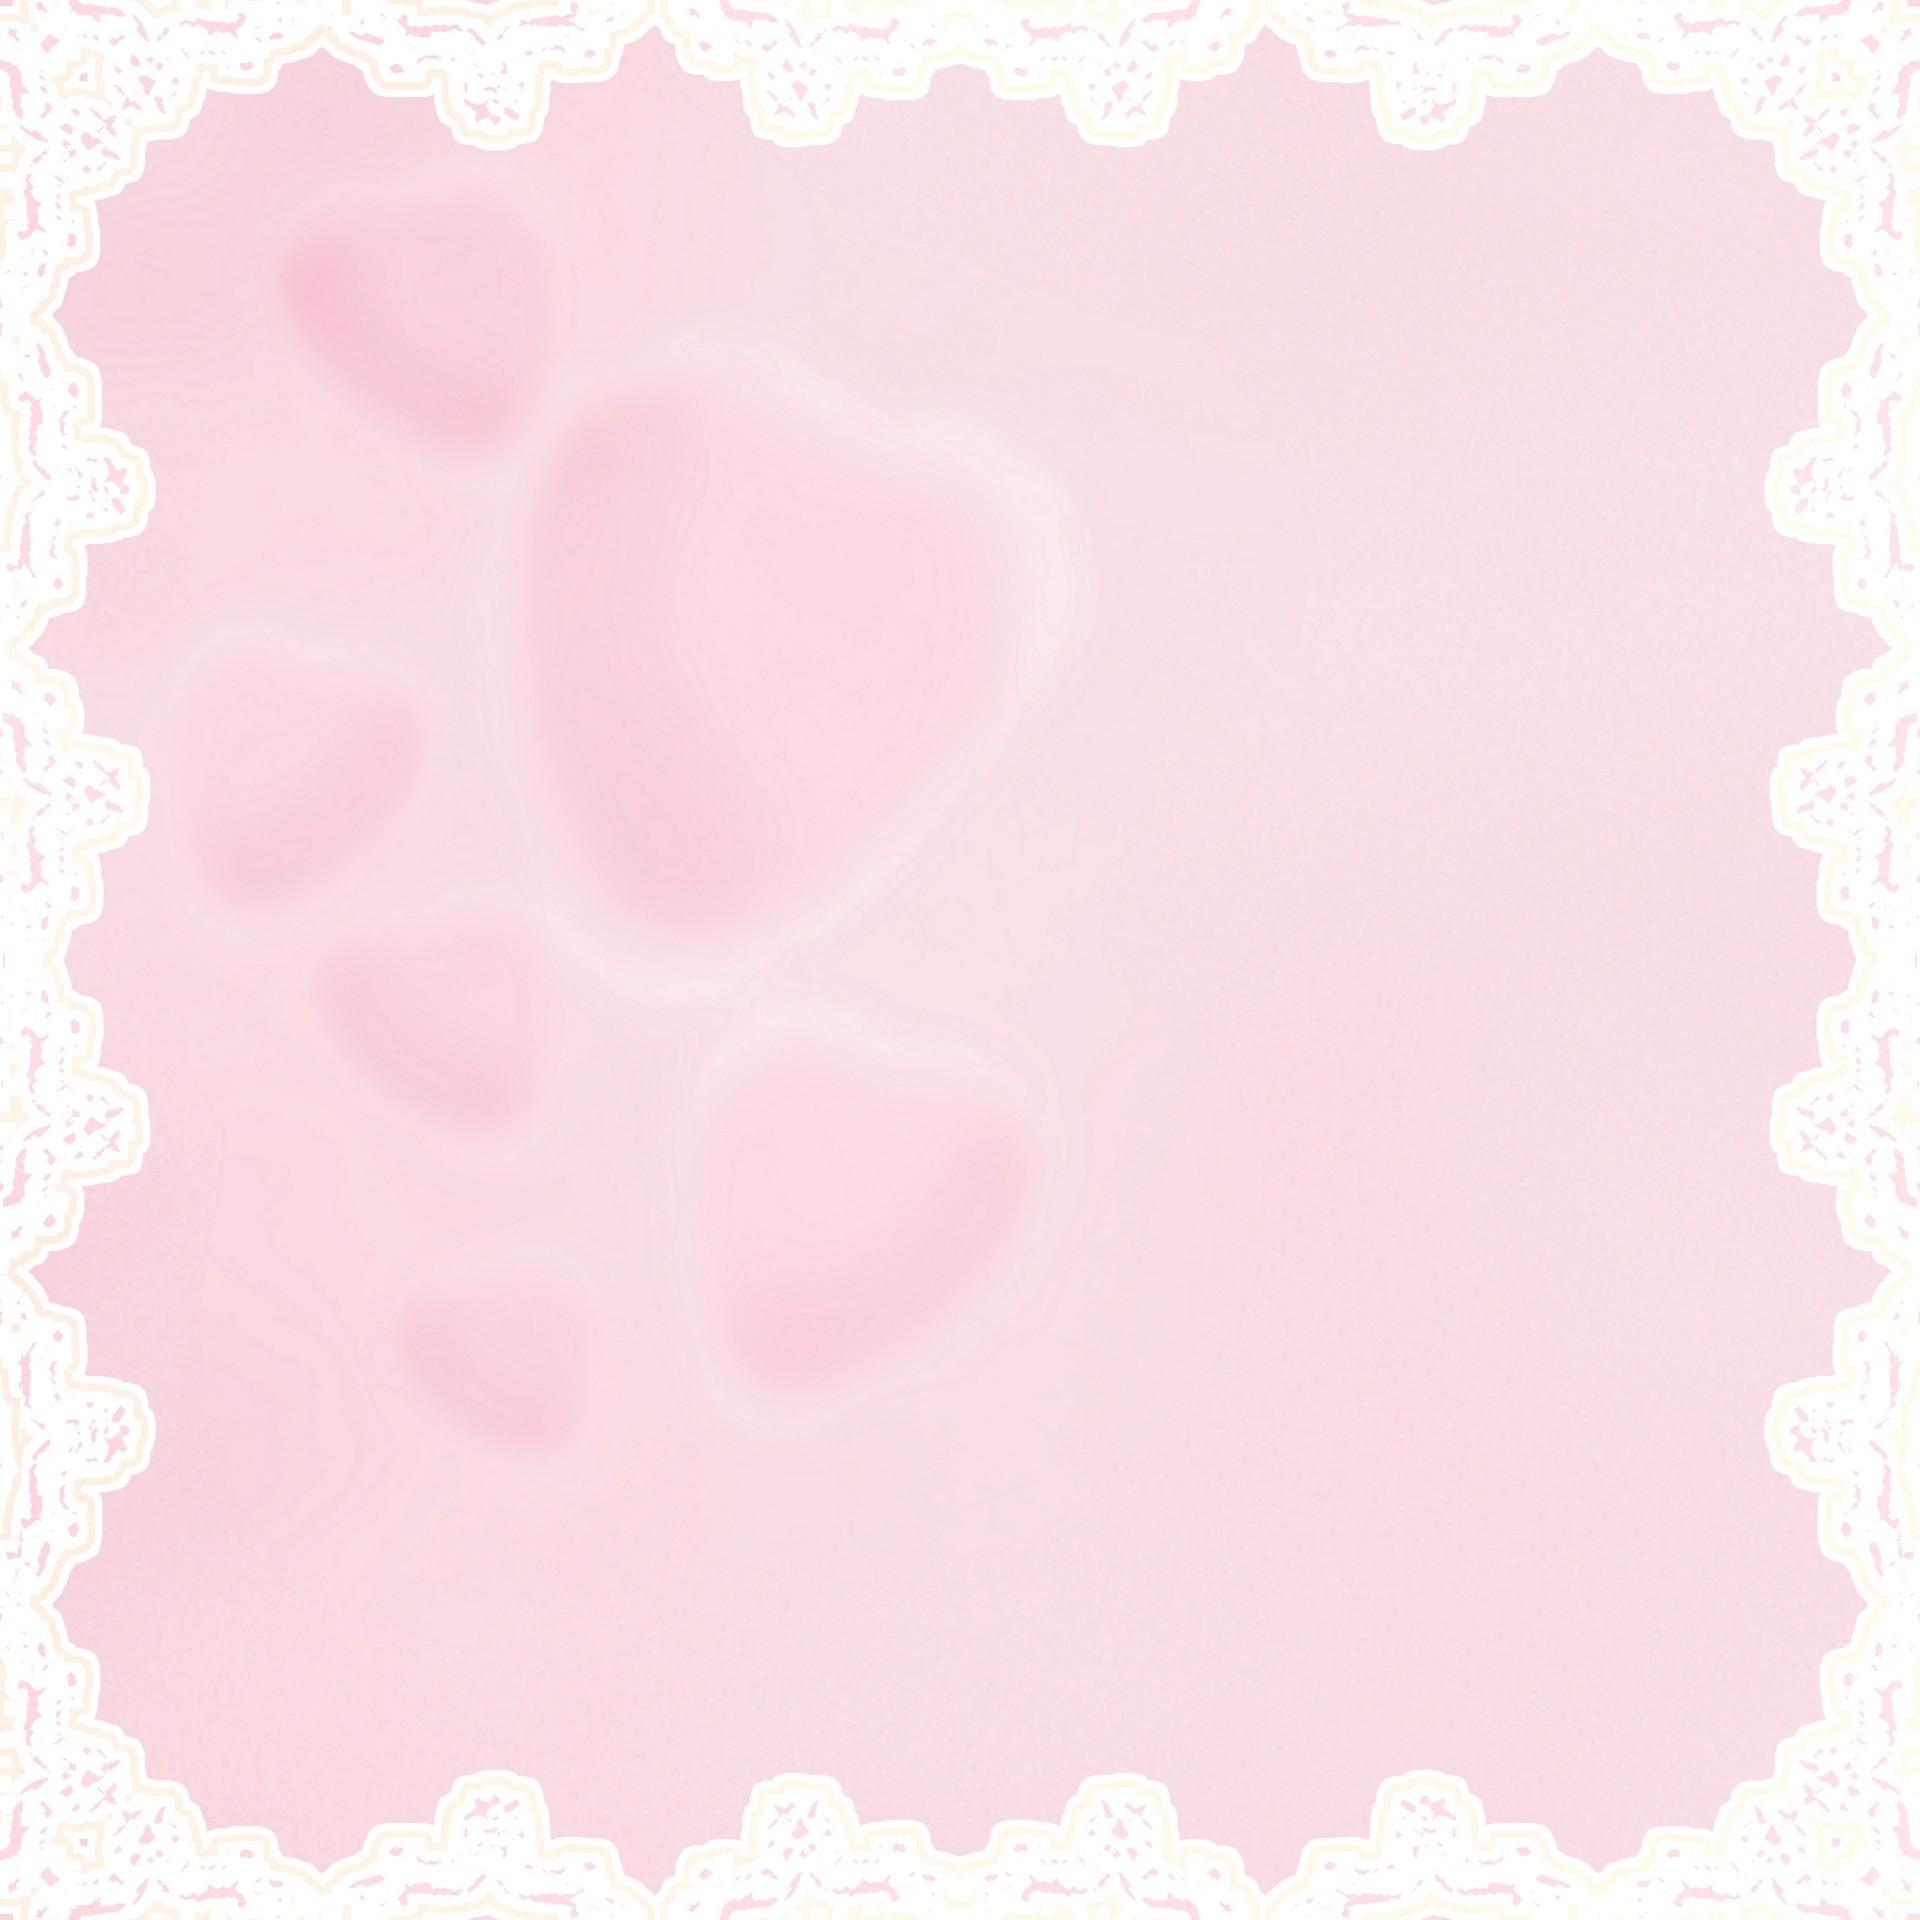 1920x1920 Pink Hearts With White Lace